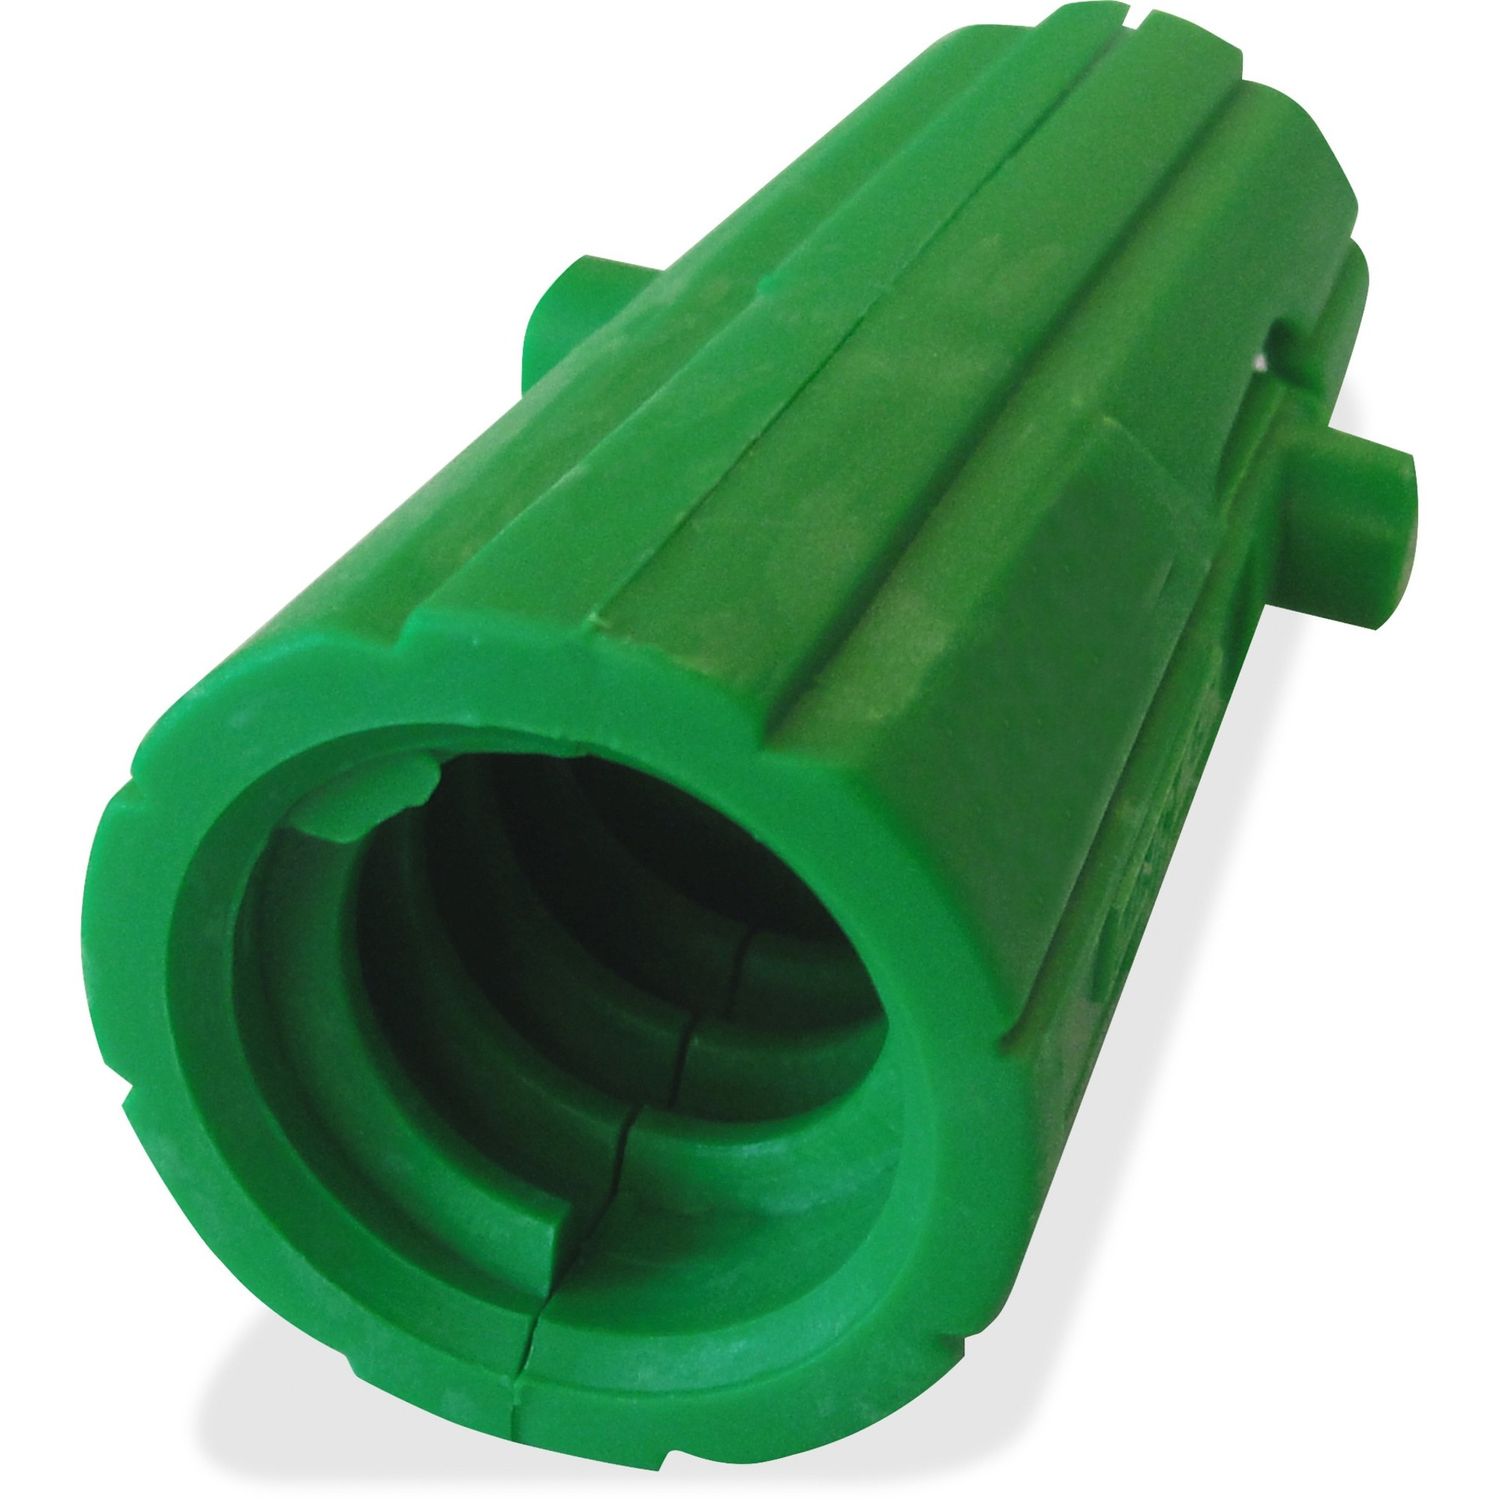 AquaDozer Mounting Adapter for Squeegee - Green 1 Each